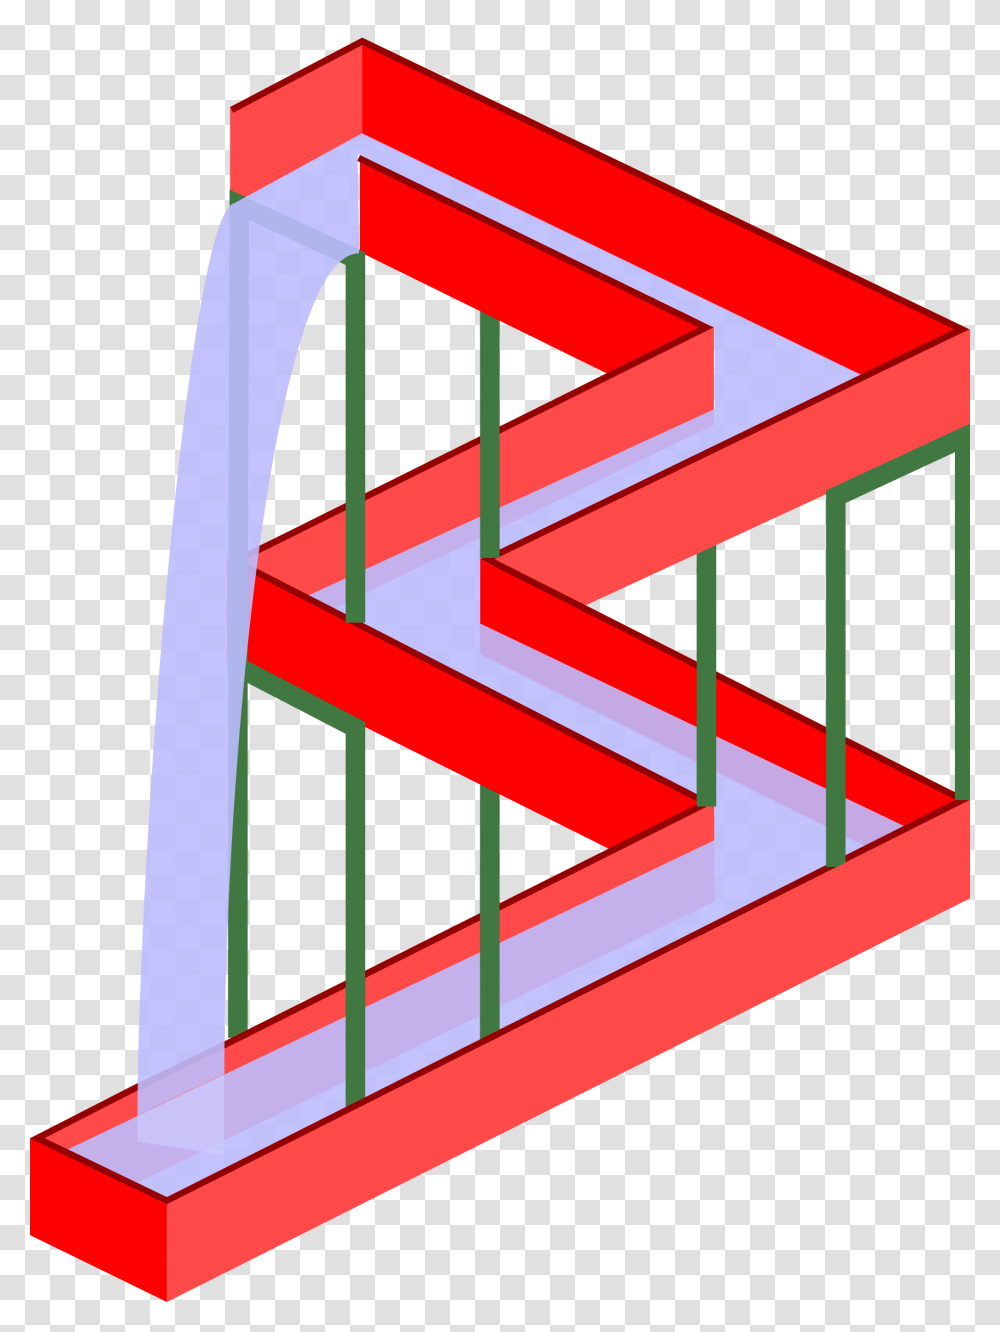 Waterfall, Triangle, Alphabet, Handrail Transparent Png